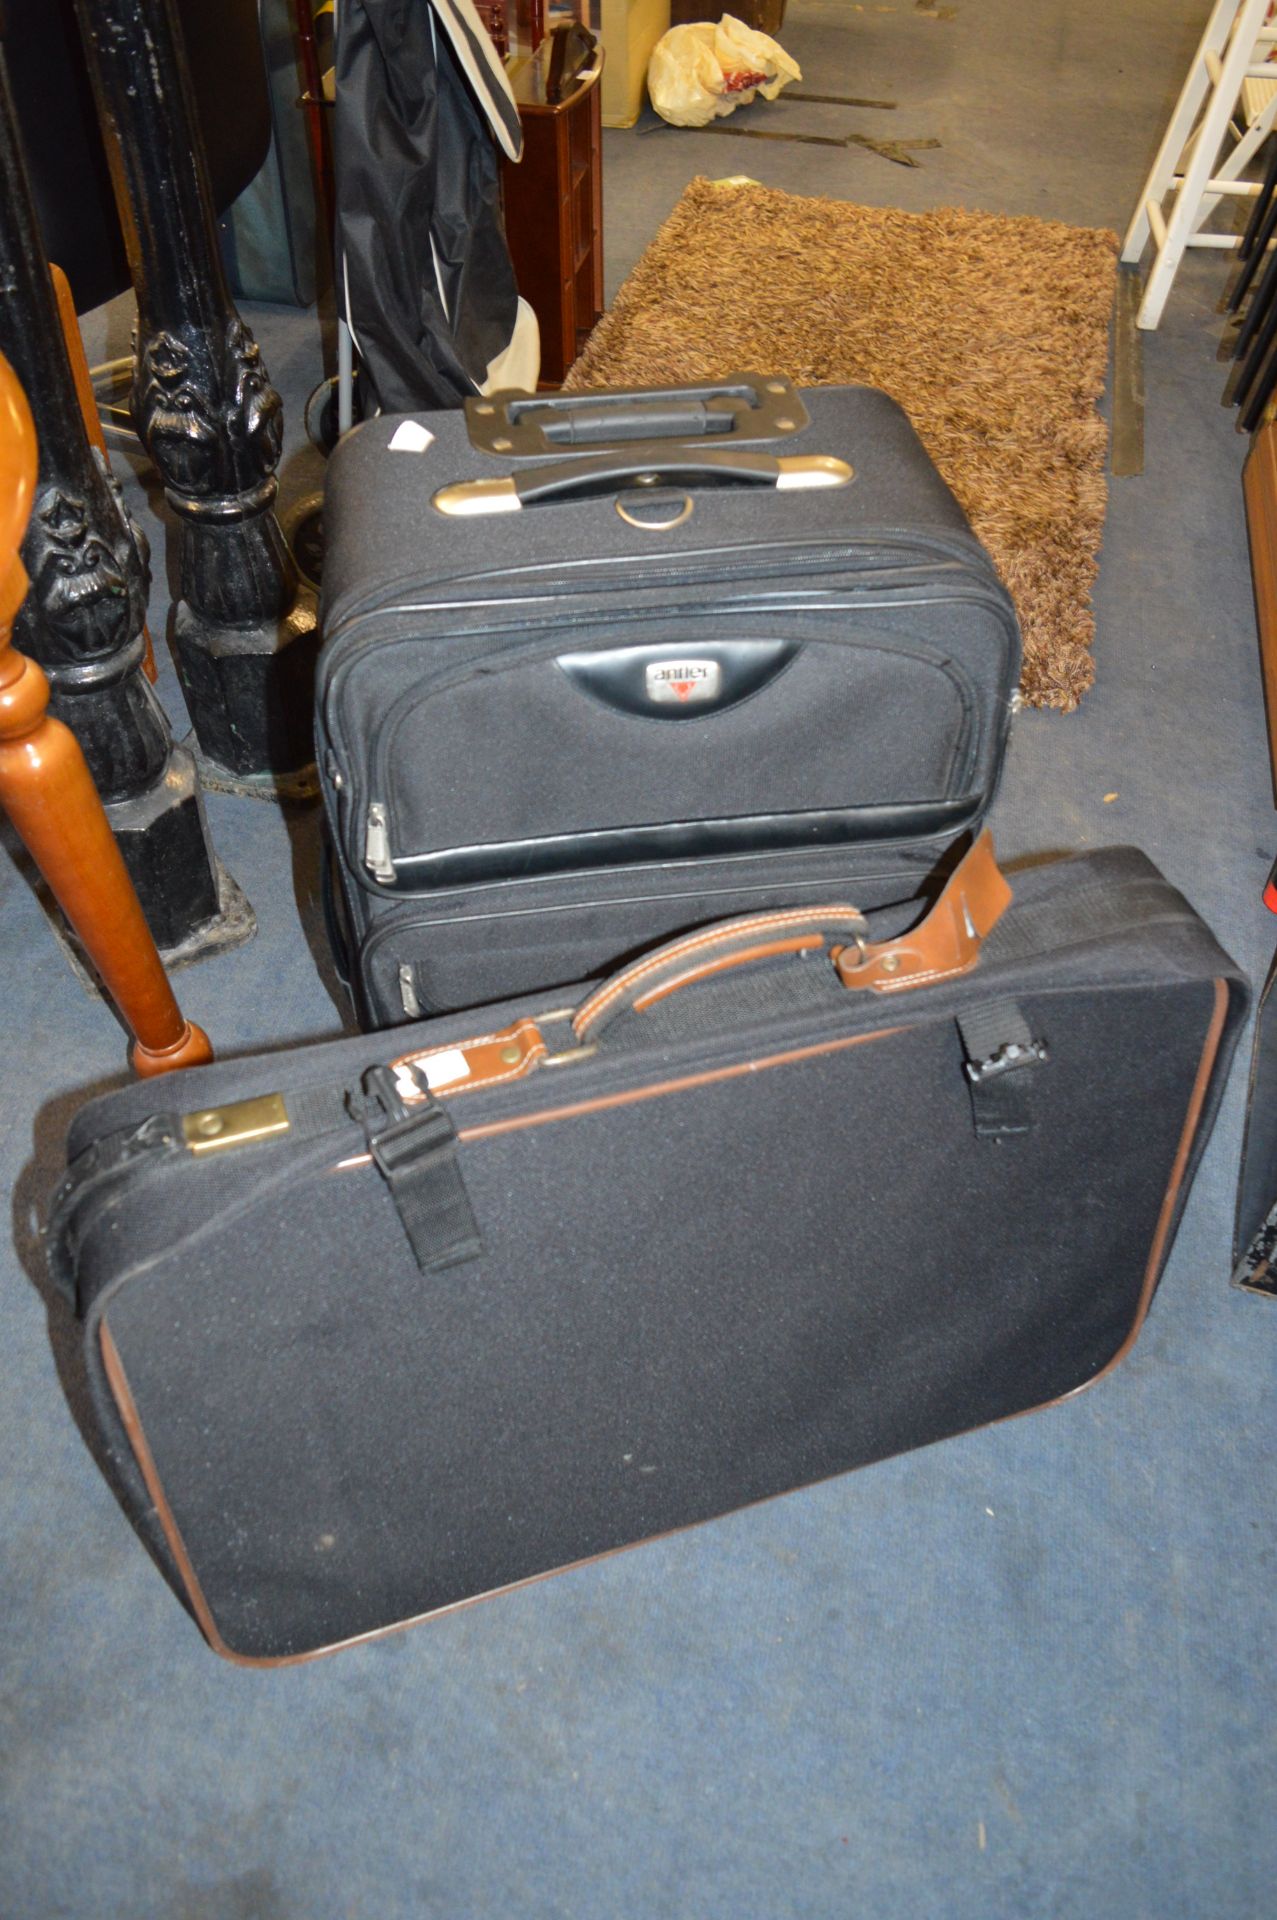 Wheeled Suitcase and a Travel Bag